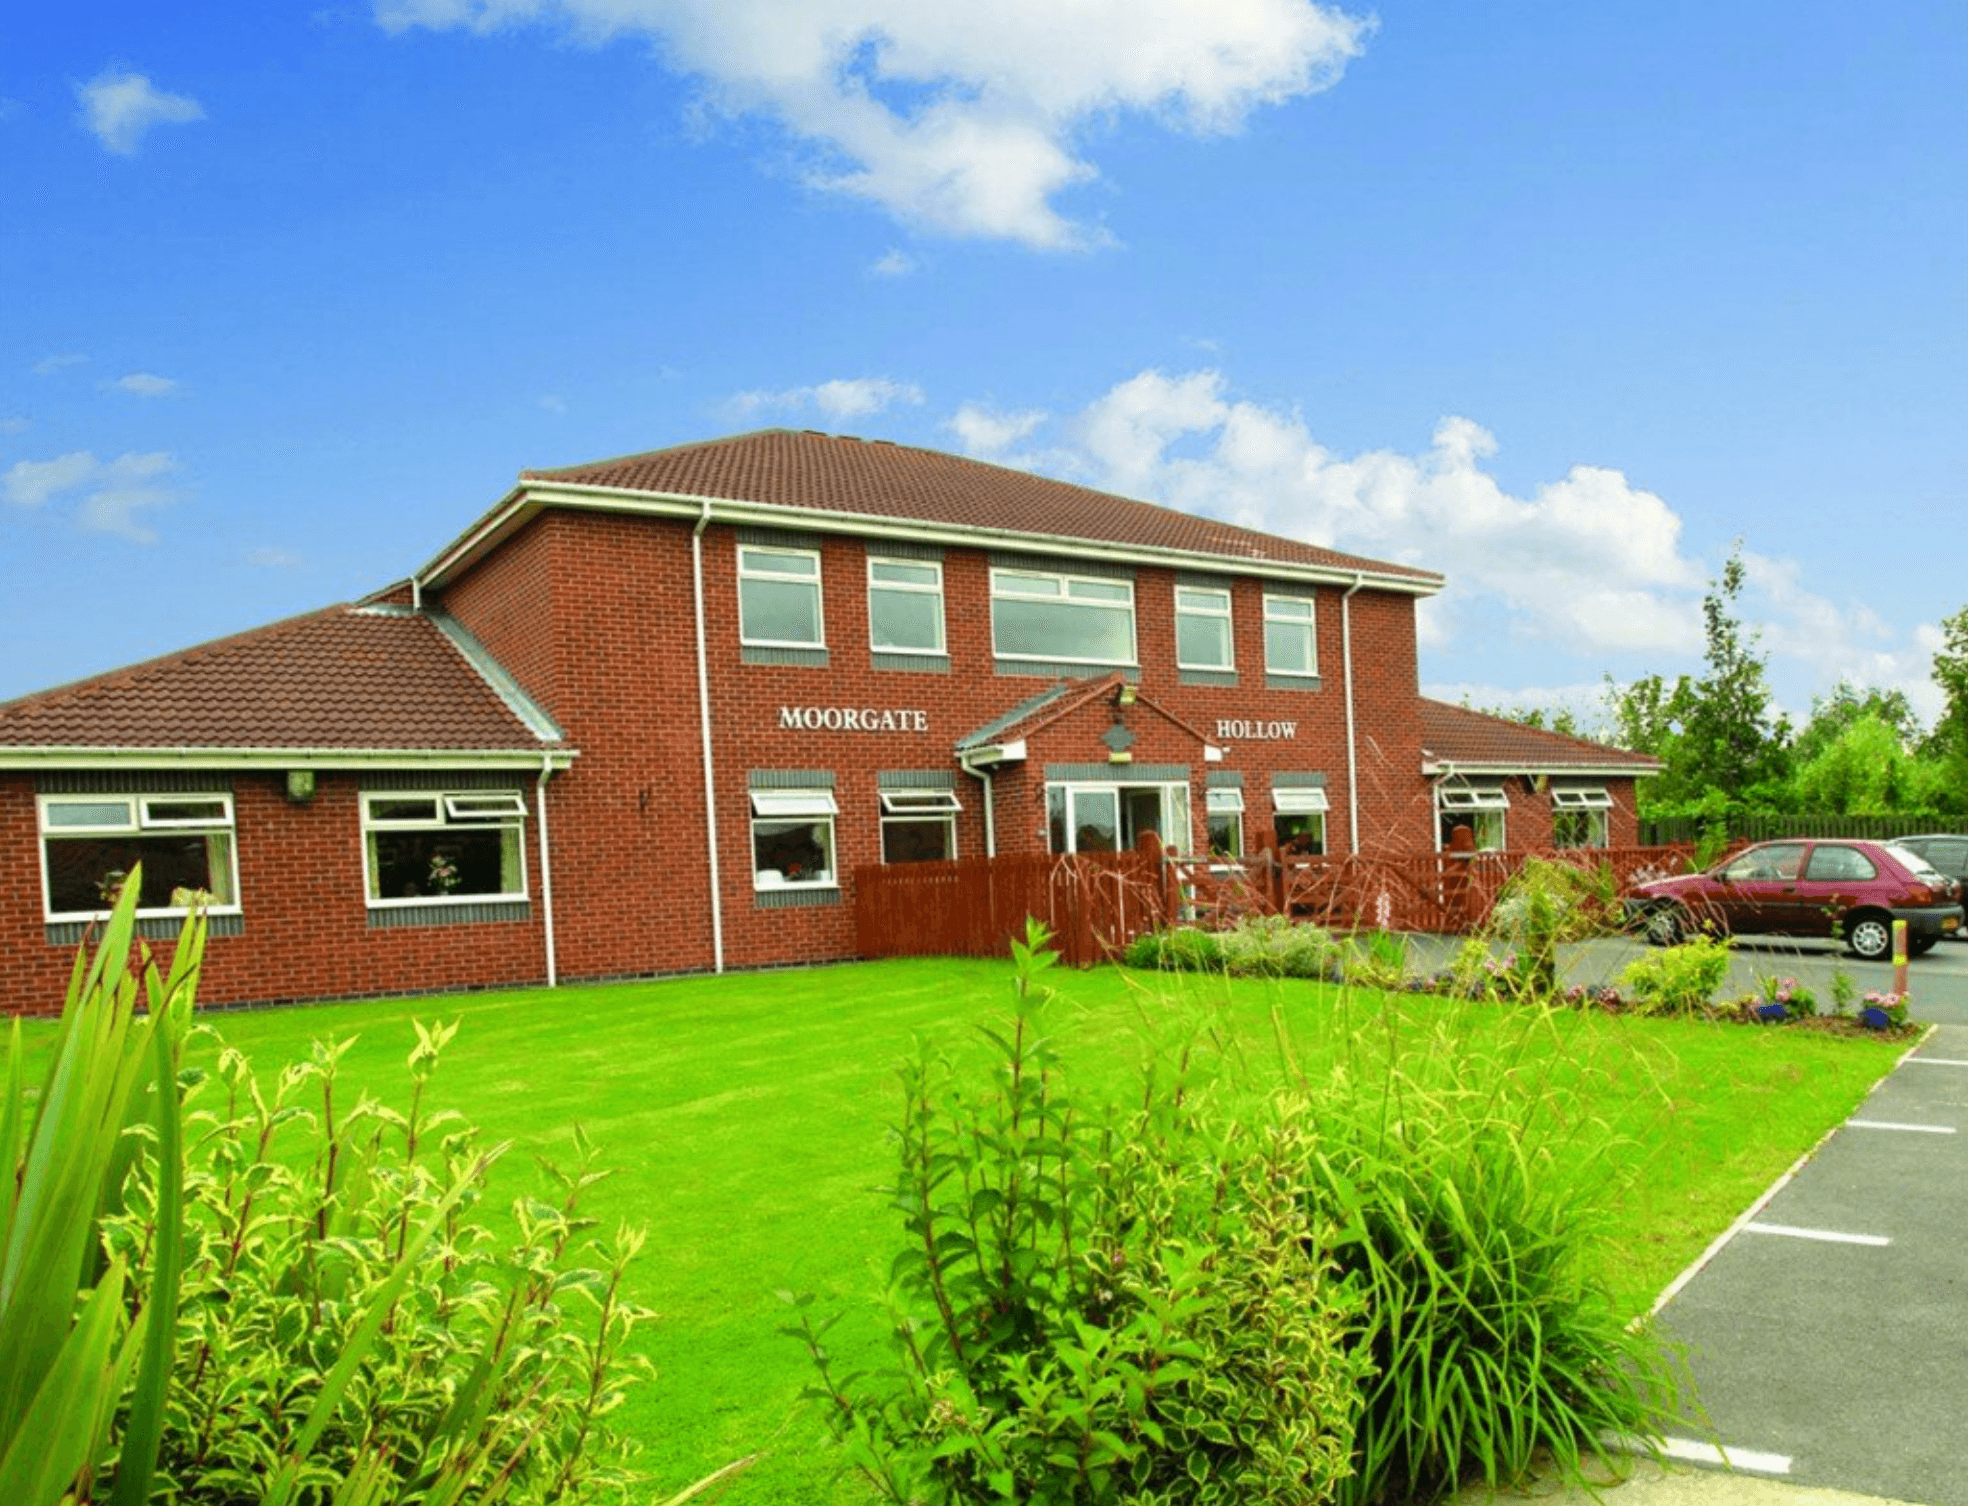 Exterior of Moorgate Hollow care home in Rotherham